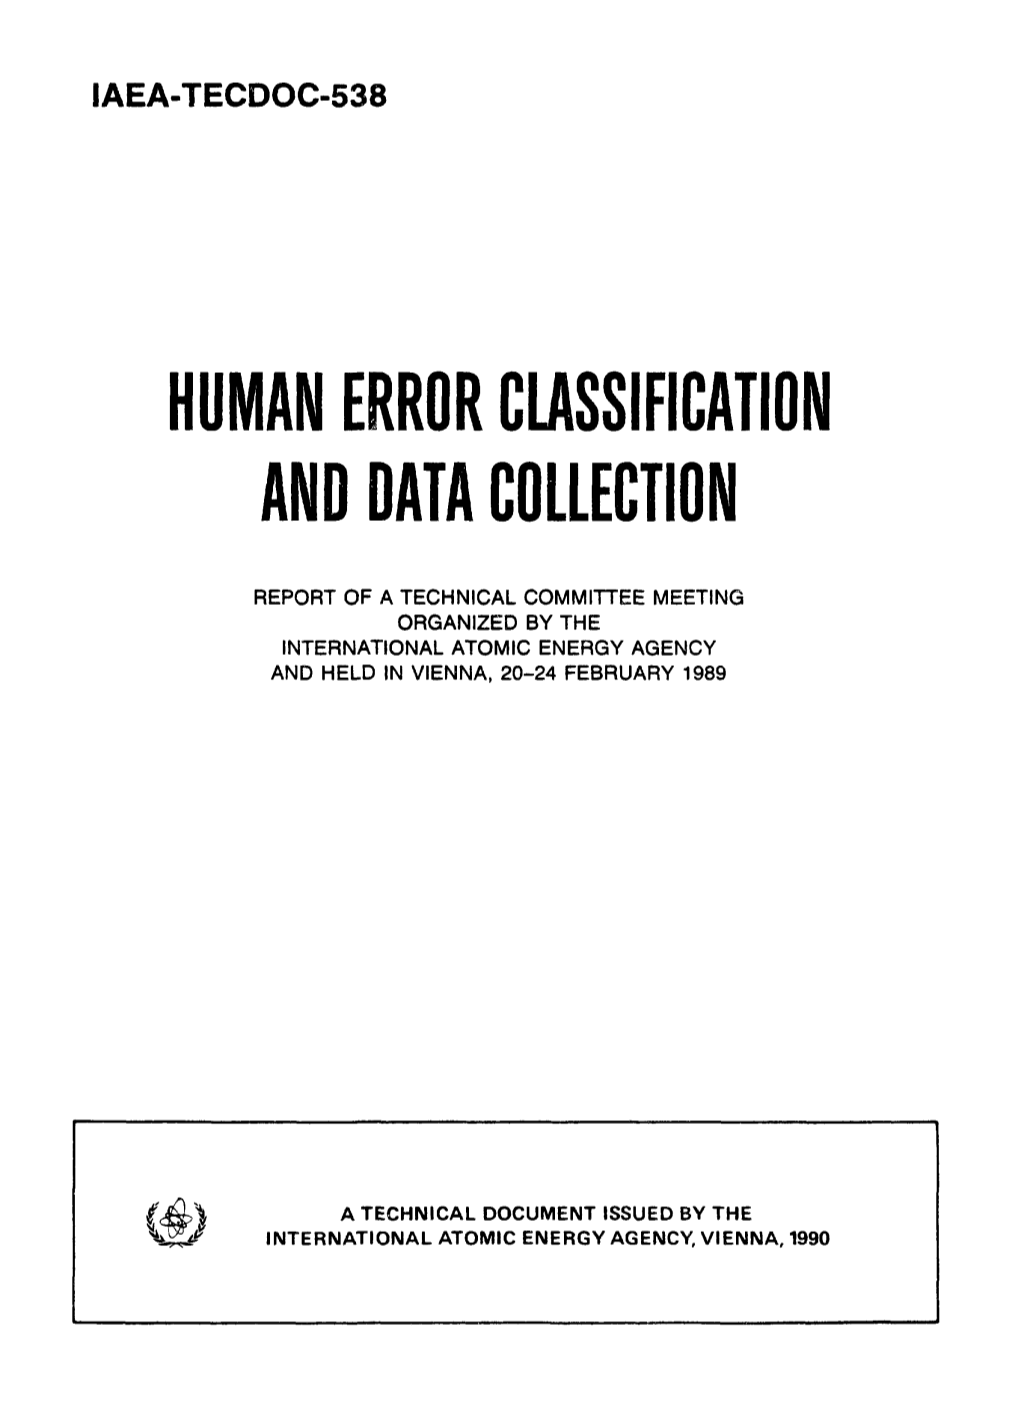 Human Error Classification and Data Collection